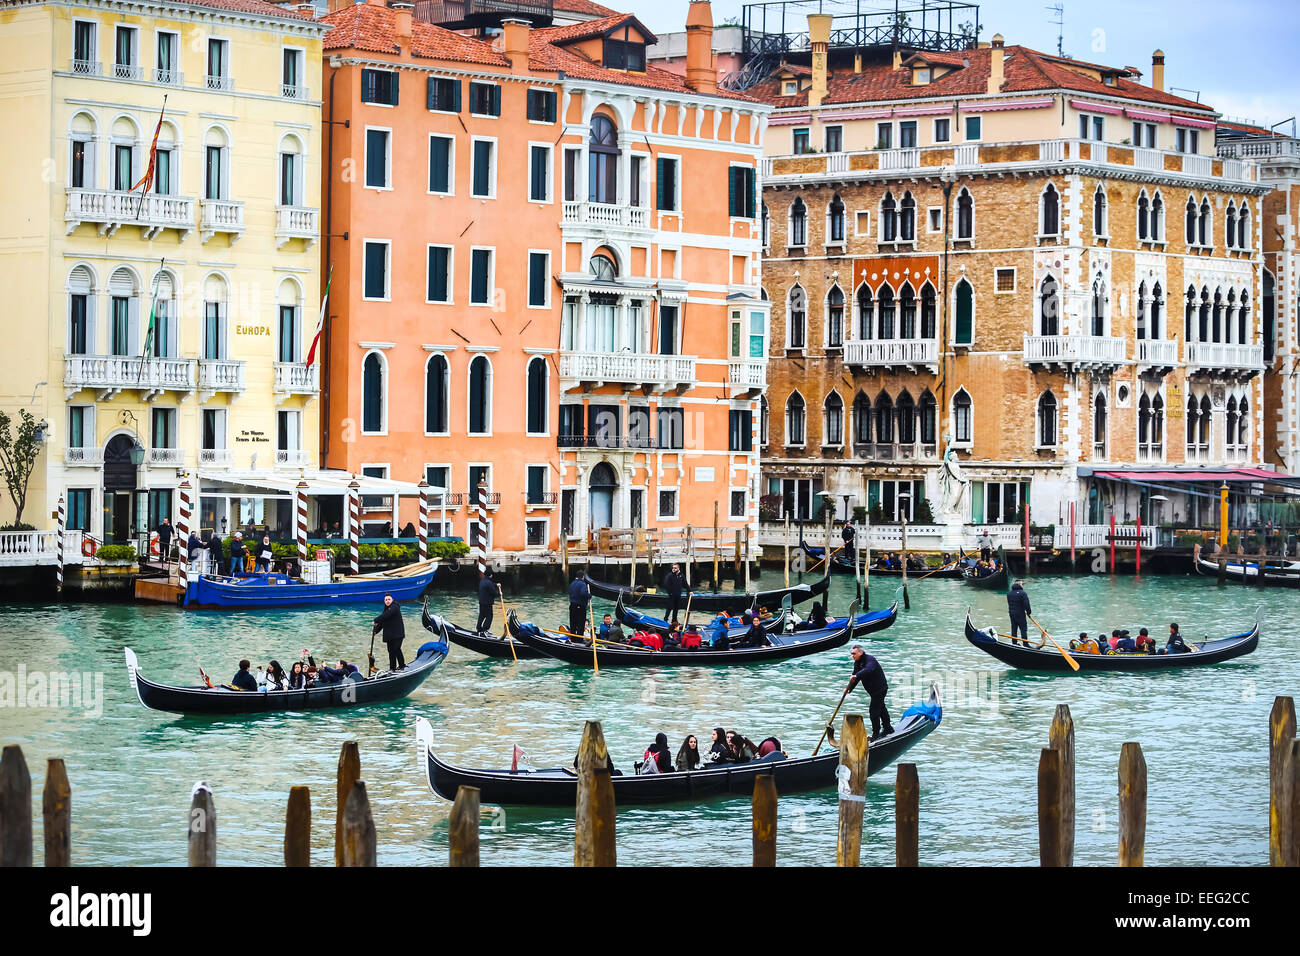 A view of gondolas with tourists sailing through a water canal in Venice, Italy. Stock Photo